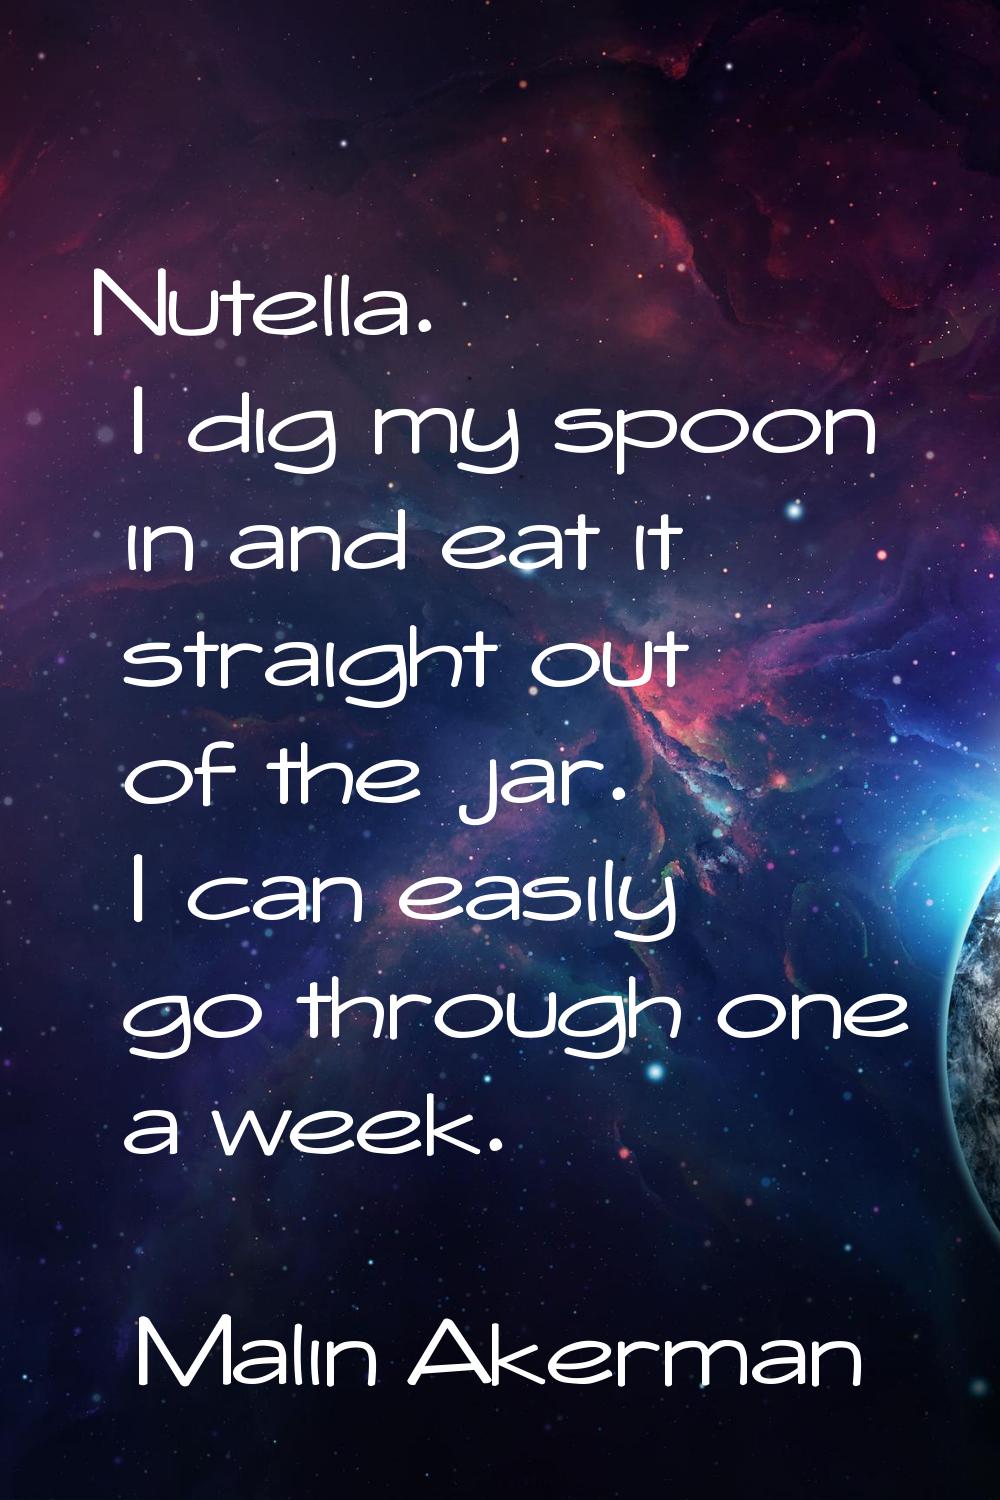 Nutella. I dig my spoon in and eat it straight out of the jar. I can easily go through one a week.